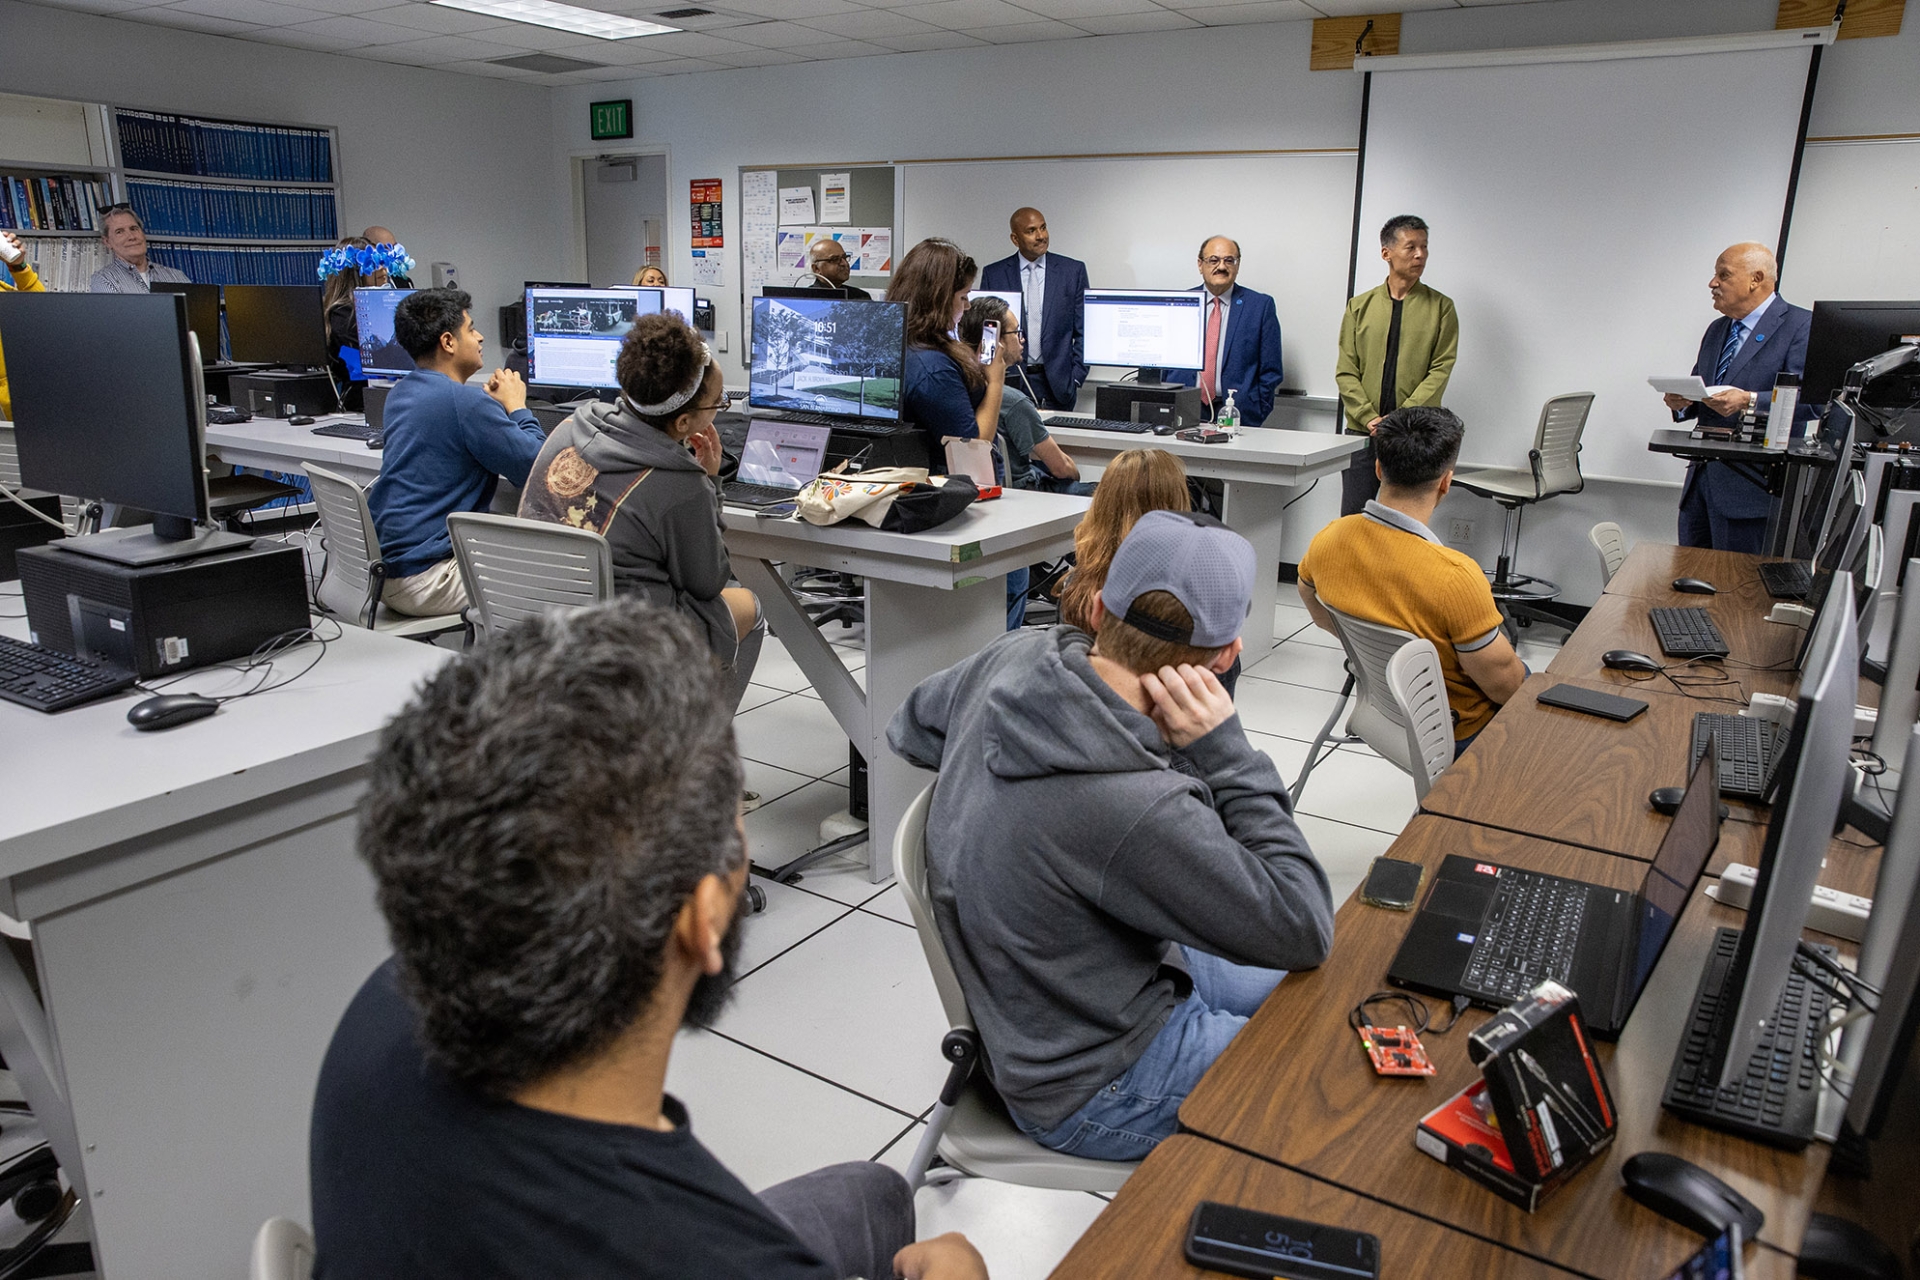 Students, faculty and administrators look on as CSUSB President Tomás D. Morales announces that Qingquan Sun, professor in the School of Computer Science and Engineering, is the recipient of the university’s 2023-24 Outstanding Scholarship, Research and Creative Activities Award.